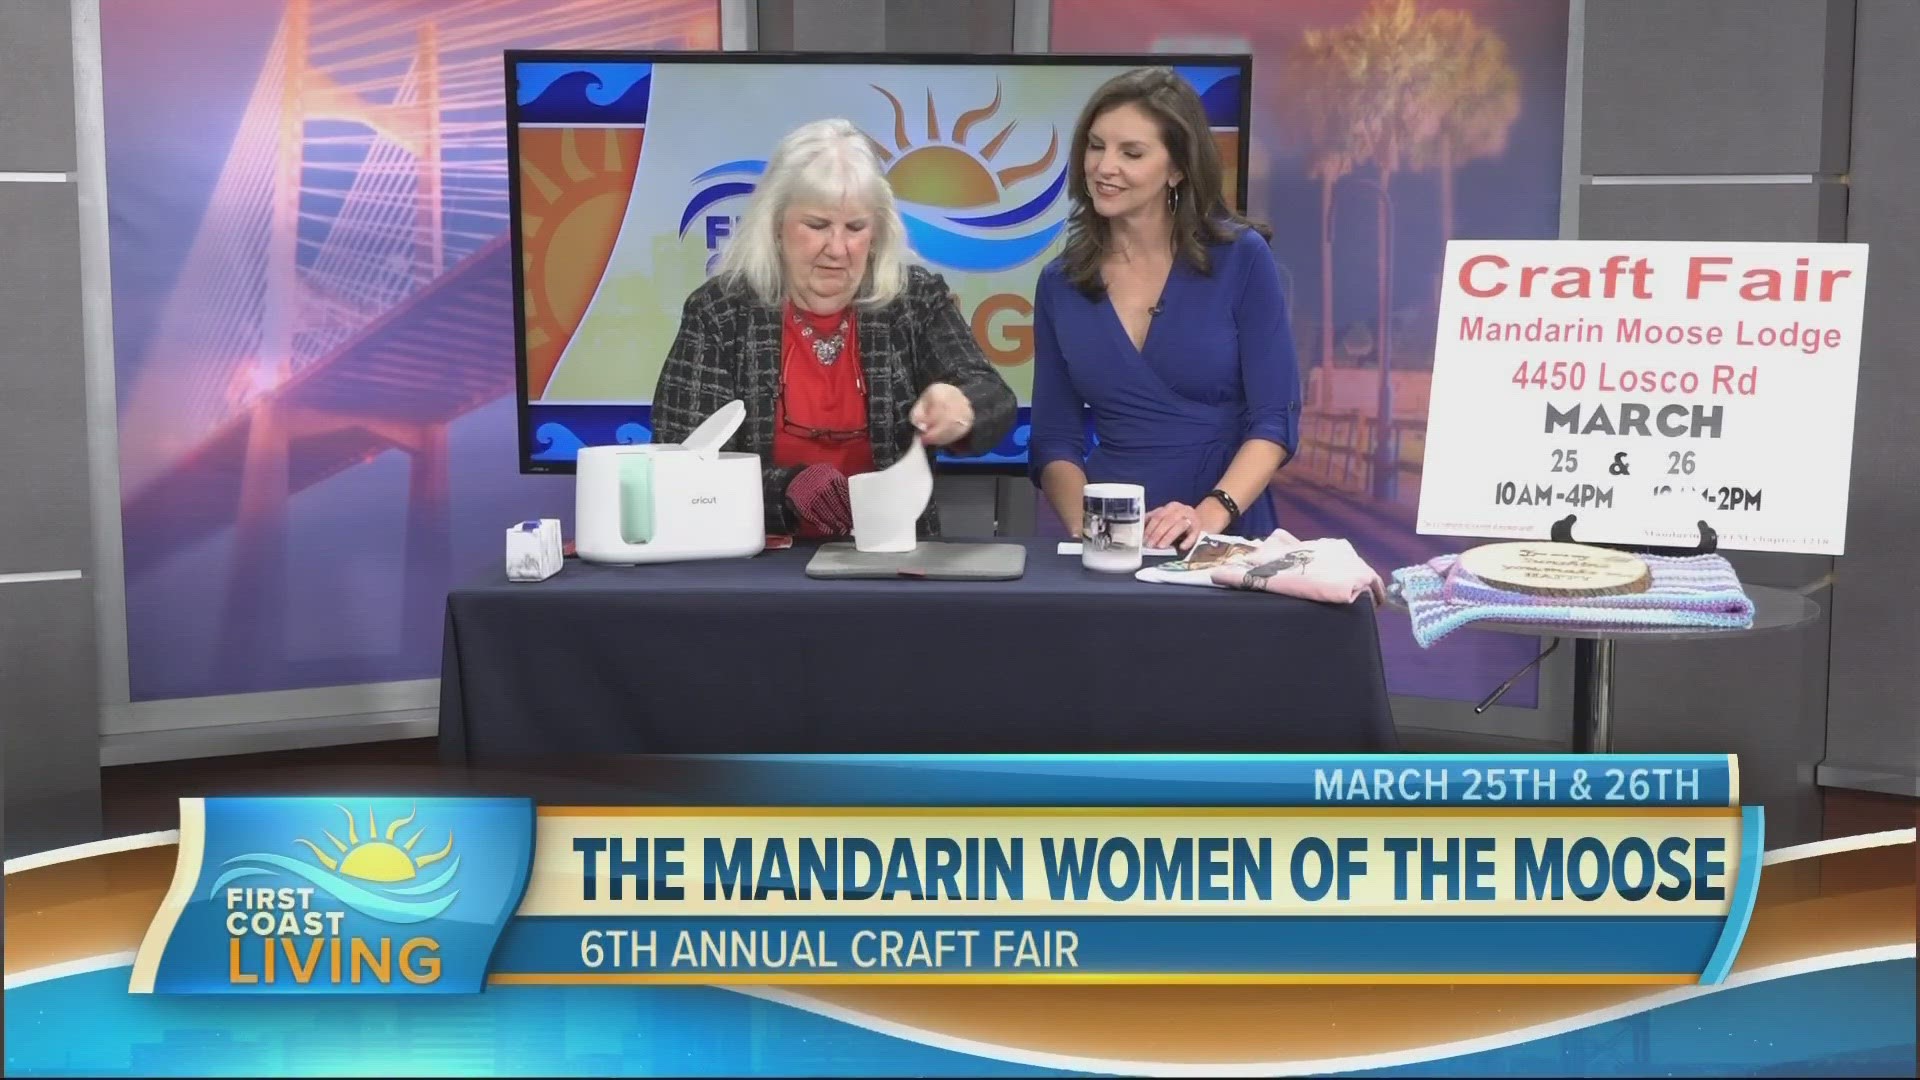 The craft fair is this weekend (March 25 & 26) at the Mandarin Moose Lodge on Losco Rd.